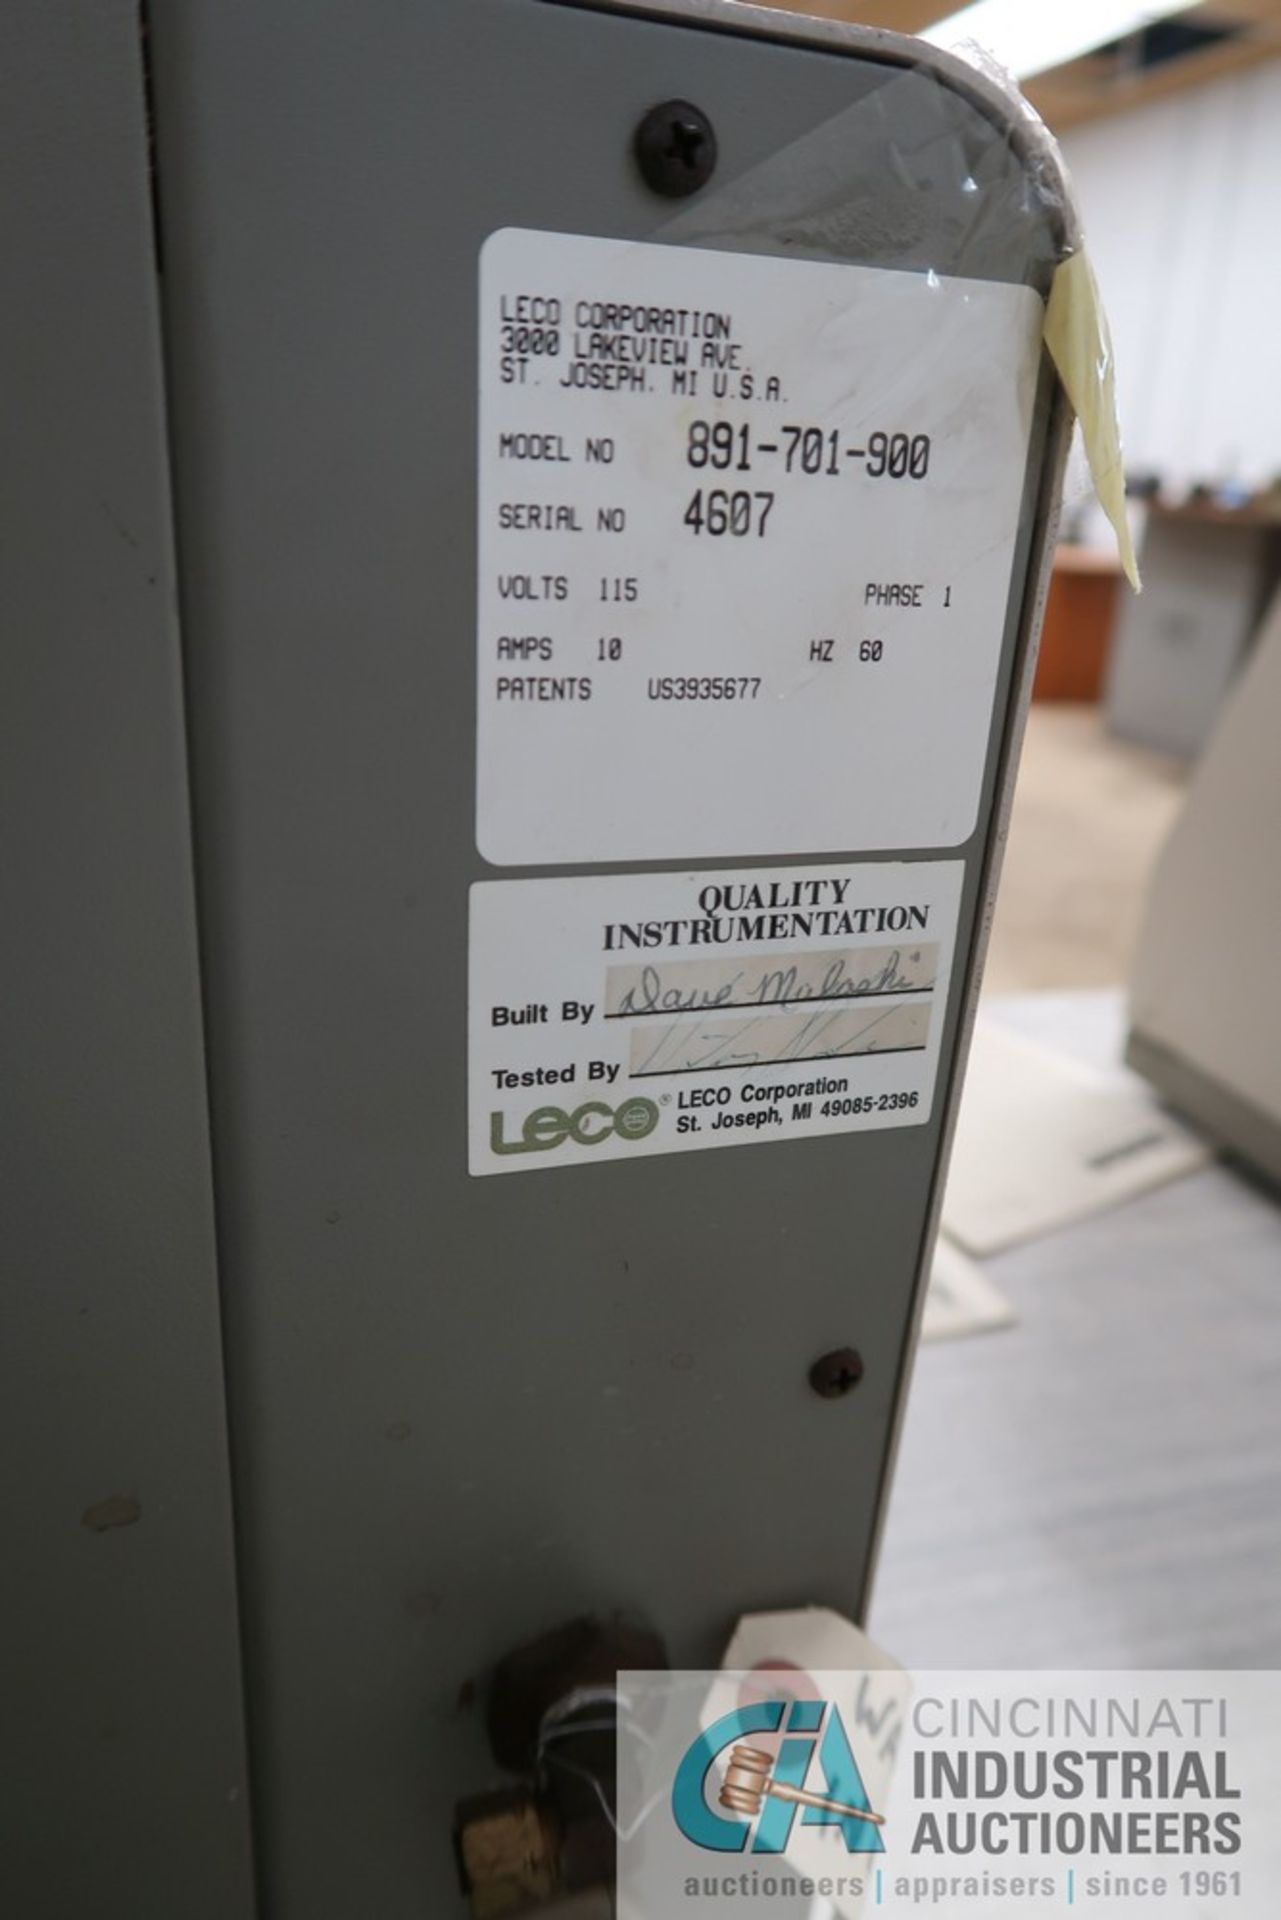 LECO MODEL 891-701-900 VP-160 VARIABLE SPEED POLISHING / GRINDING MACHINE; S/N 4607, WITH AP-60 - Image 5 of 6